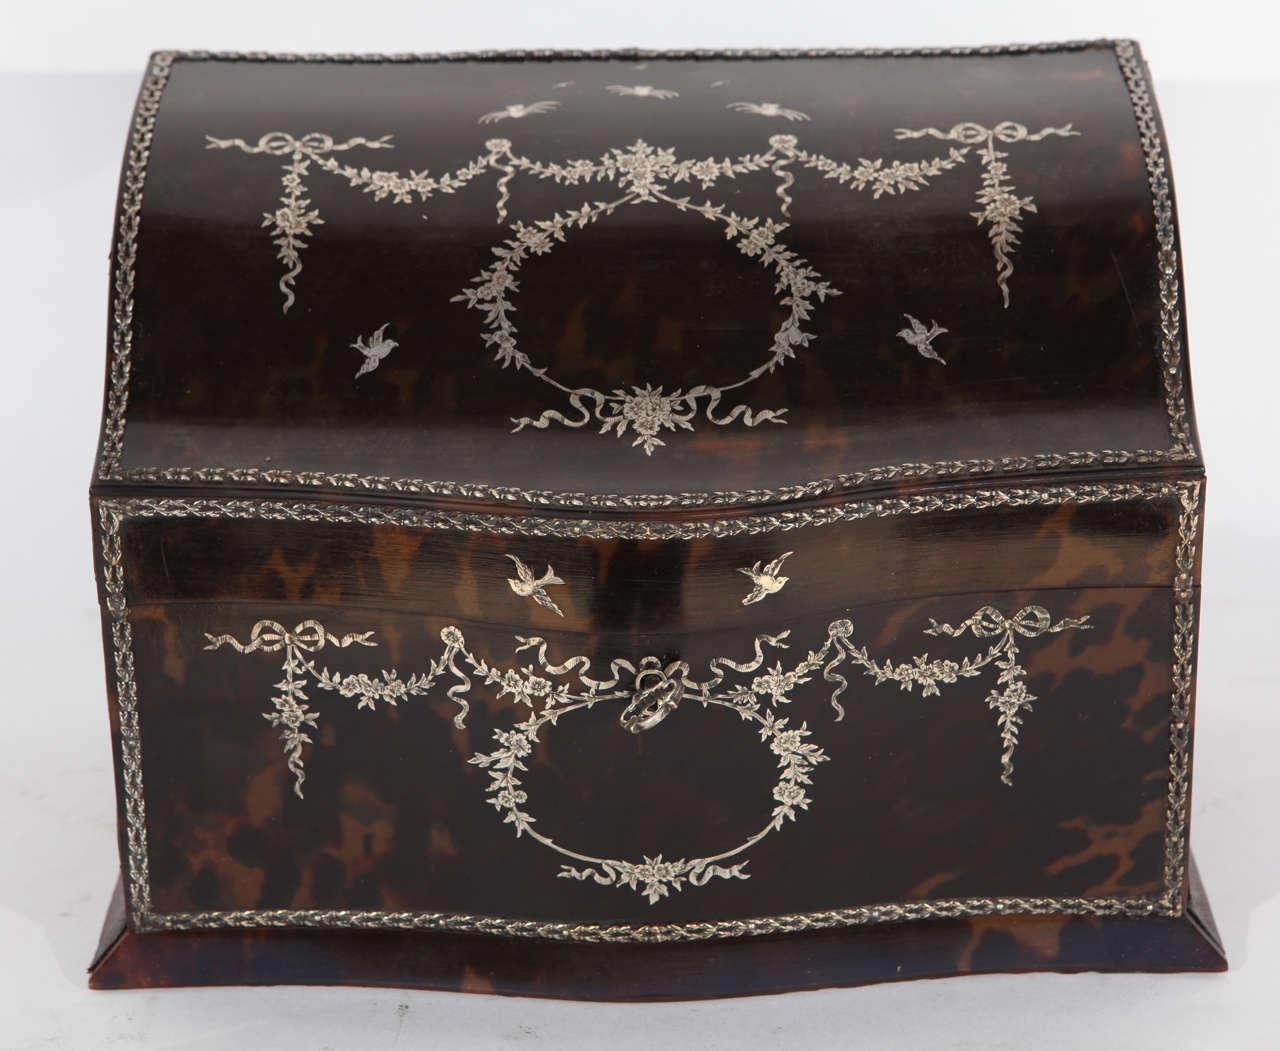 Early 1900's English Tortoiseshell Letter Box with Sterling Silver Inlay and Mounts.  Asprey London.